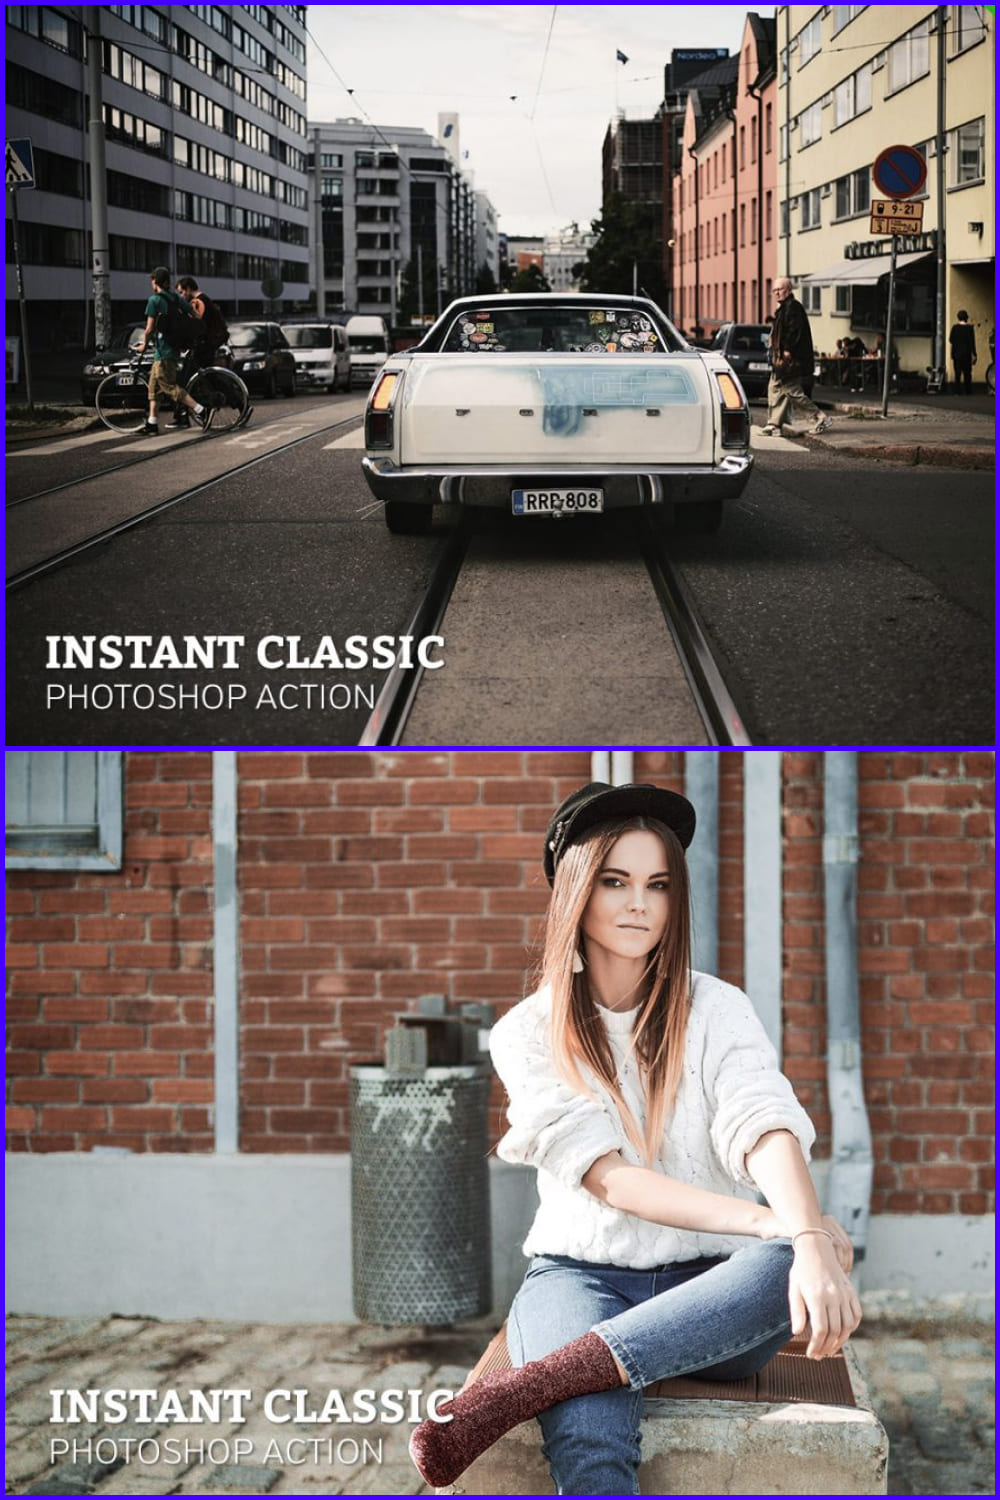 Collage of photos of a car on the street and a girl on the background of the wall.